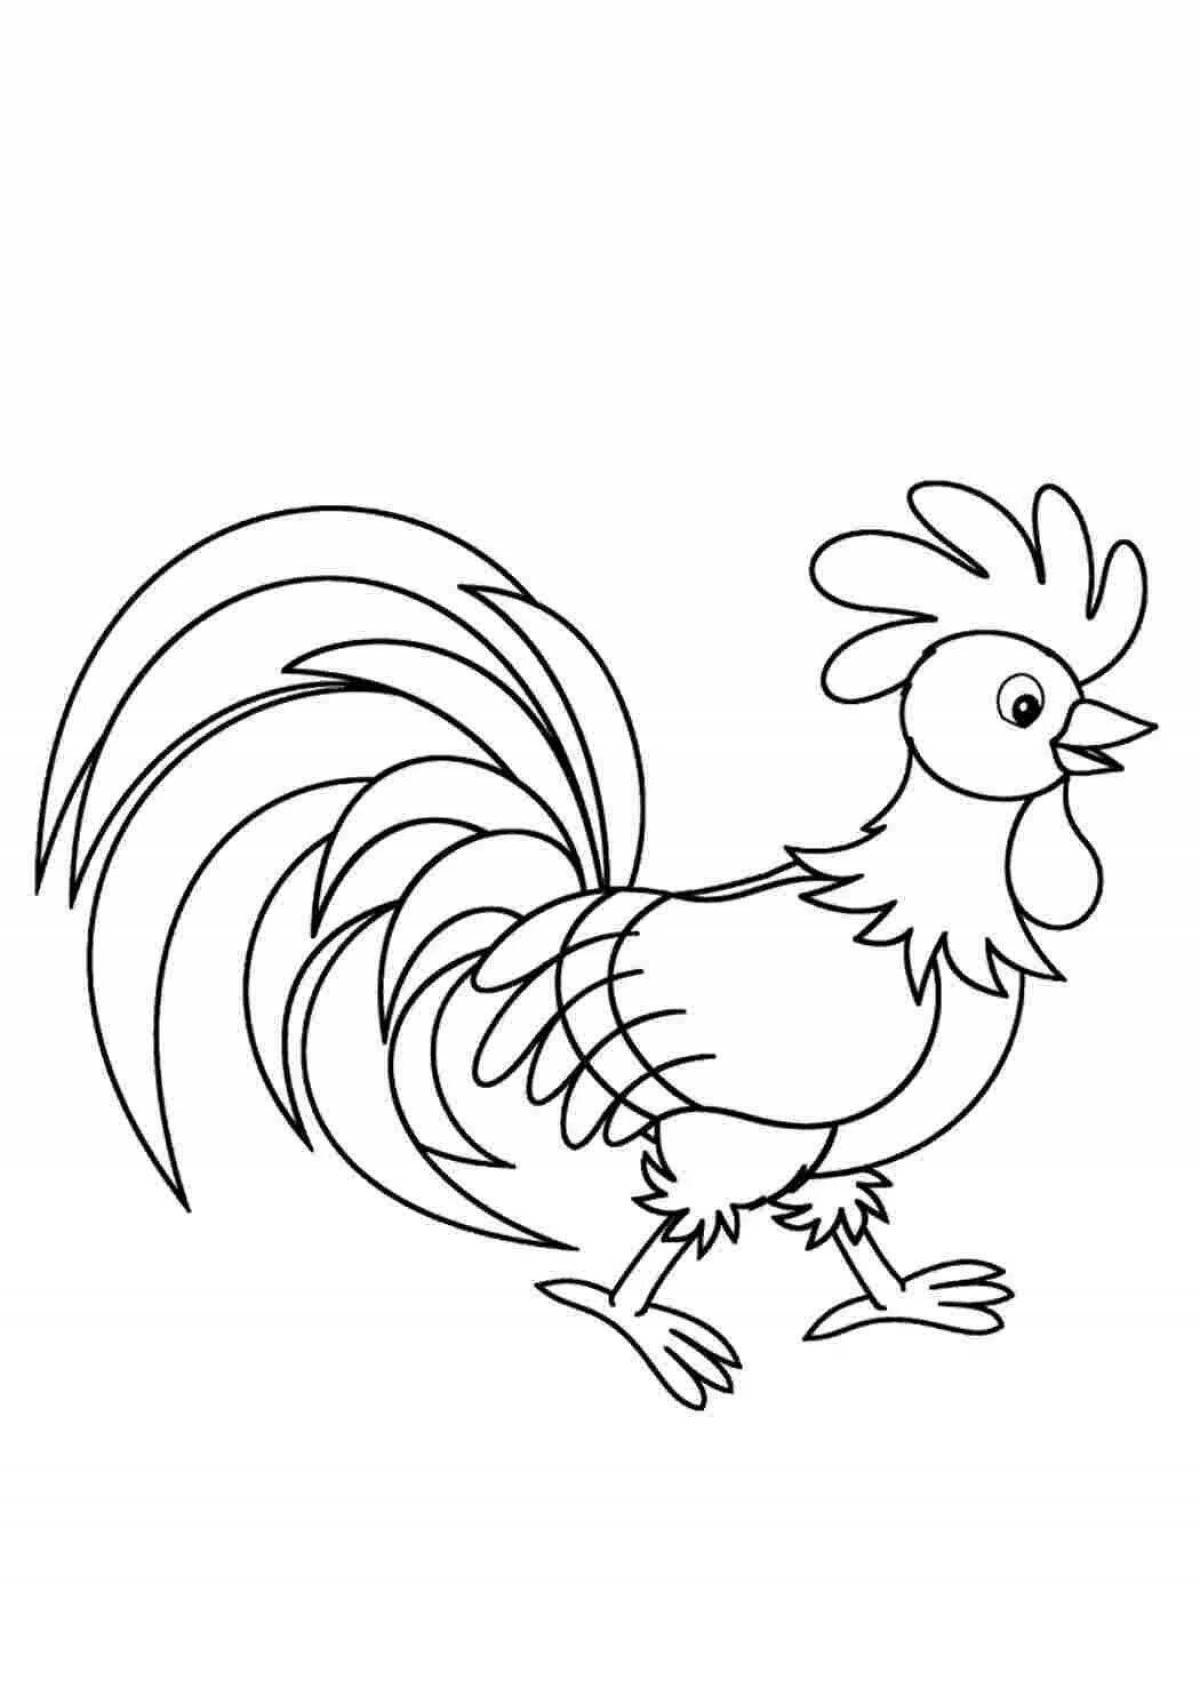 Coloring book playful rooster for children 3-4 years old